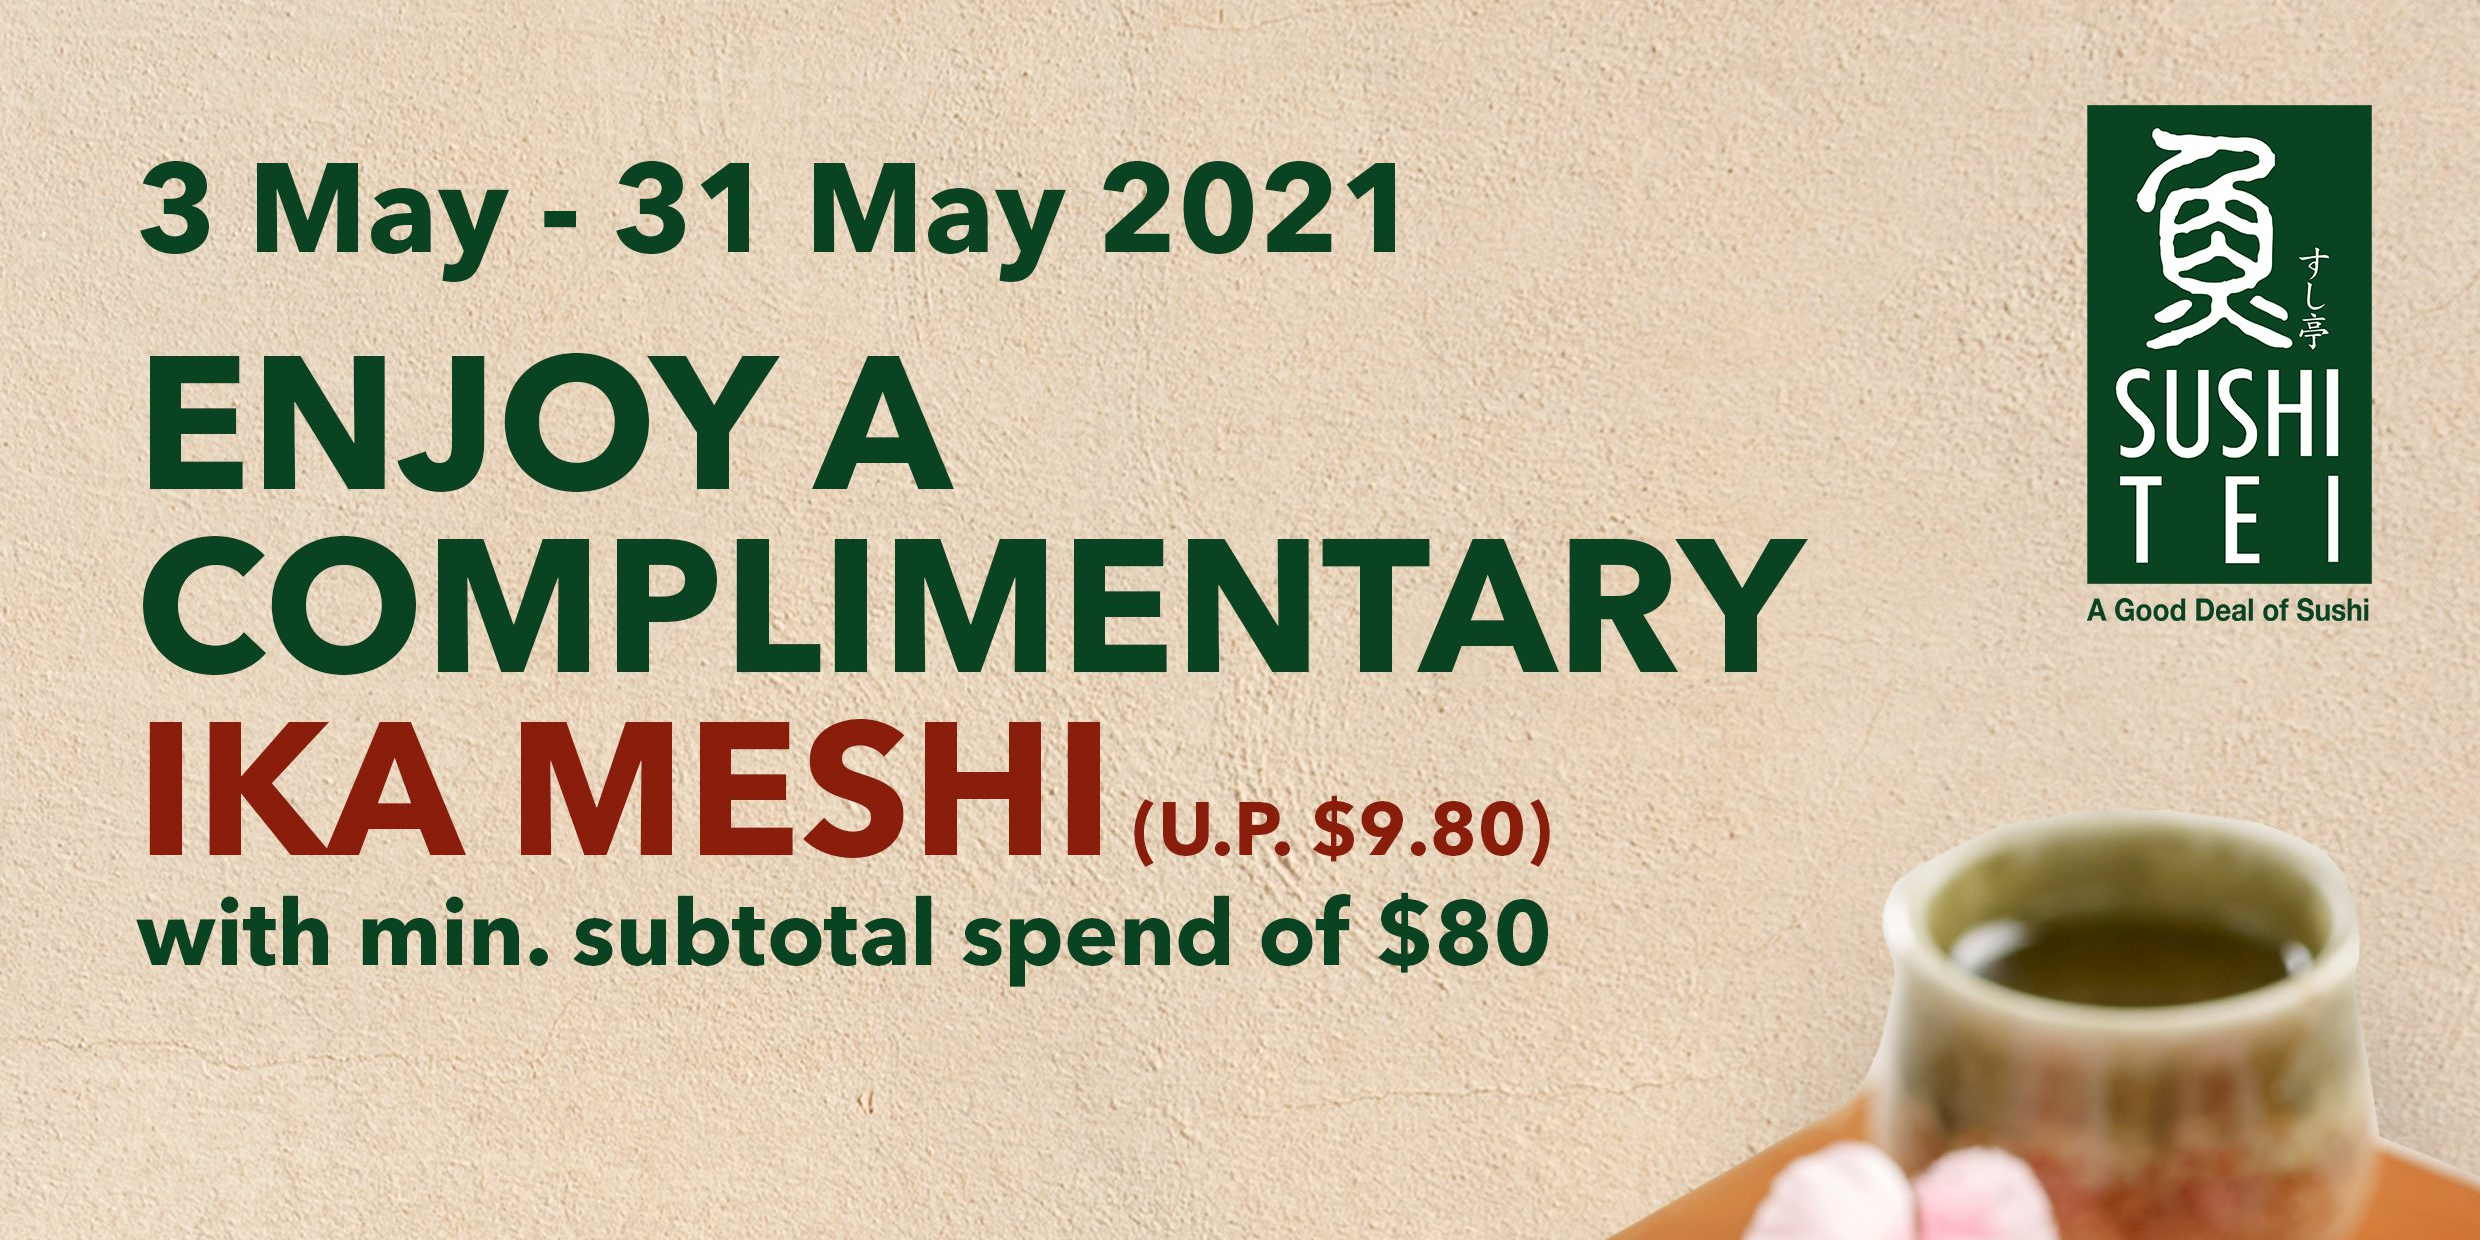 Free dish* when you dine at Sushi Tei from now till 31 May 2021